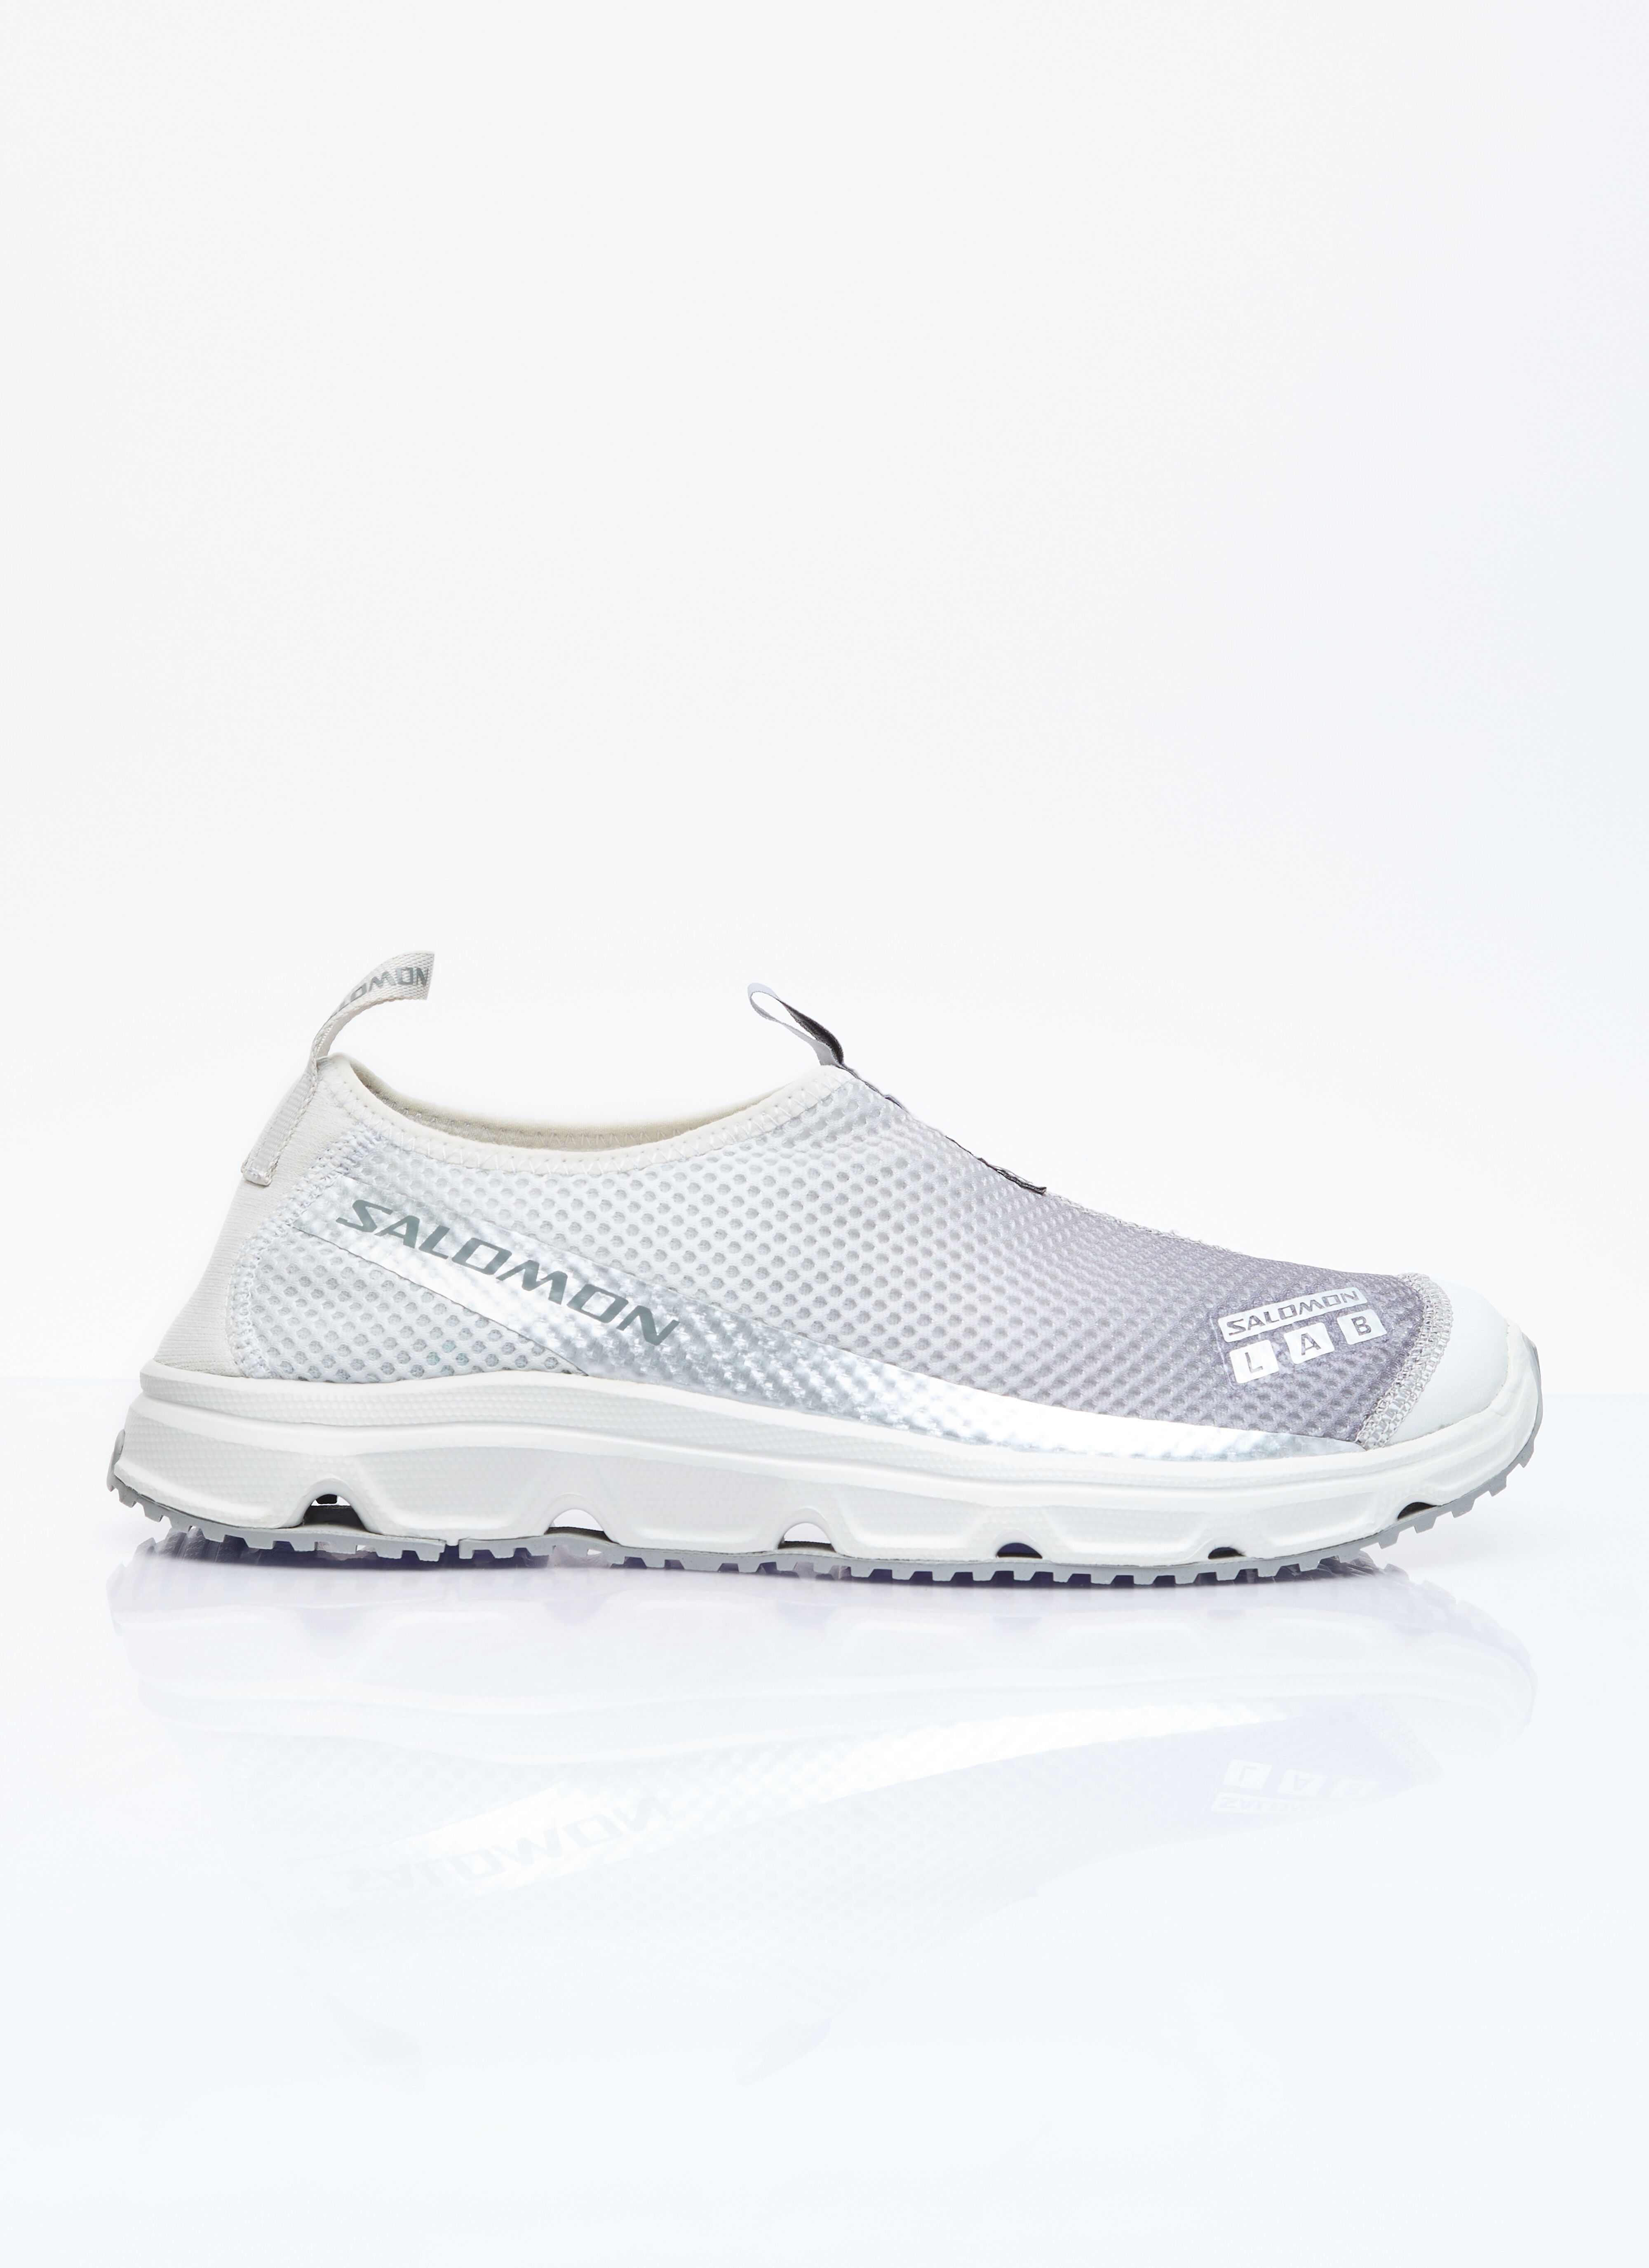 Oakley Factory Team RX Moc 3.0 Sneakers White oft0156002